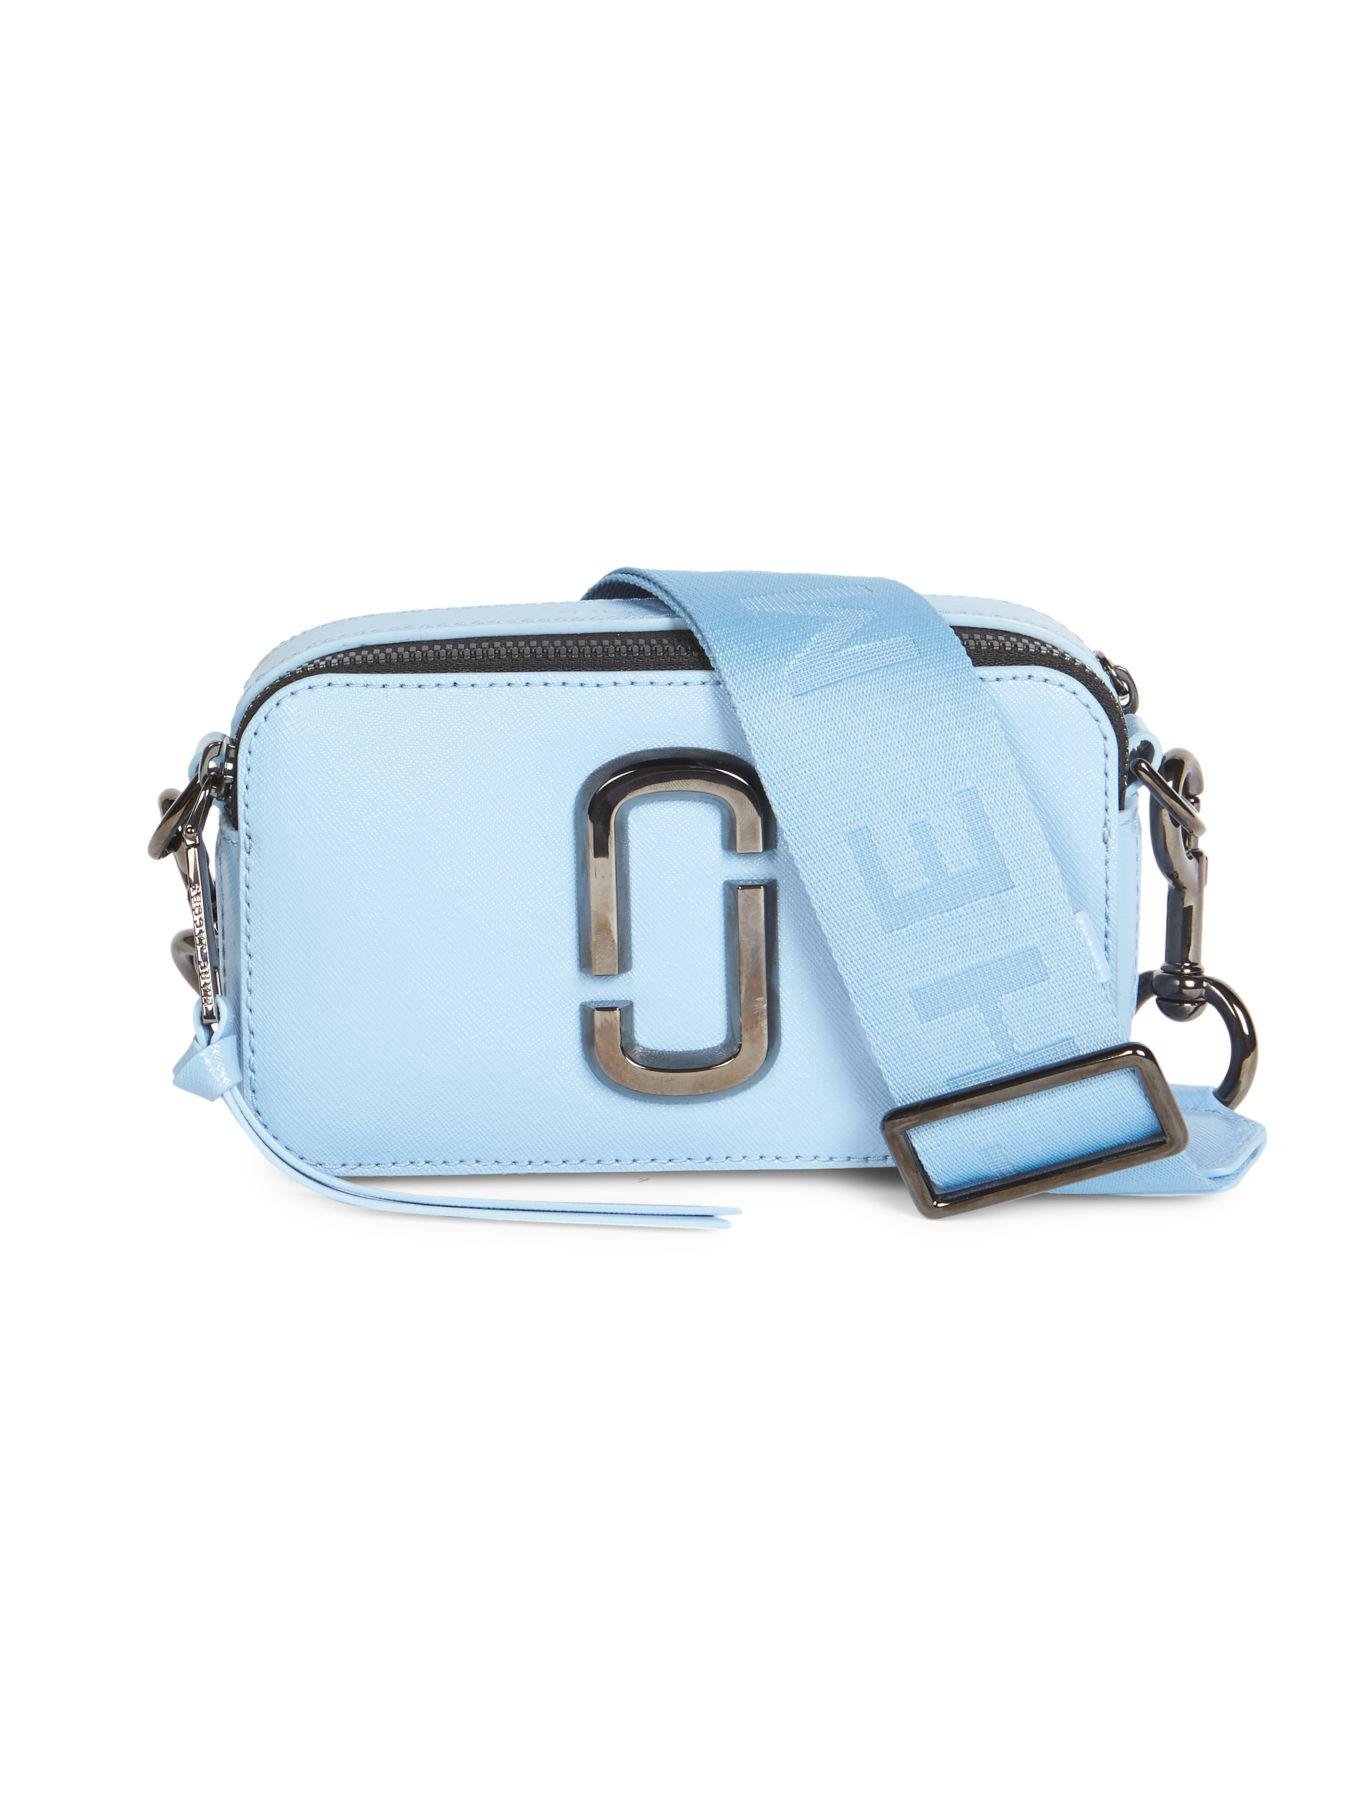 Marc Jacobs The Snapshot Dtm Coated Leather Camera Bag in Blue - Lyst